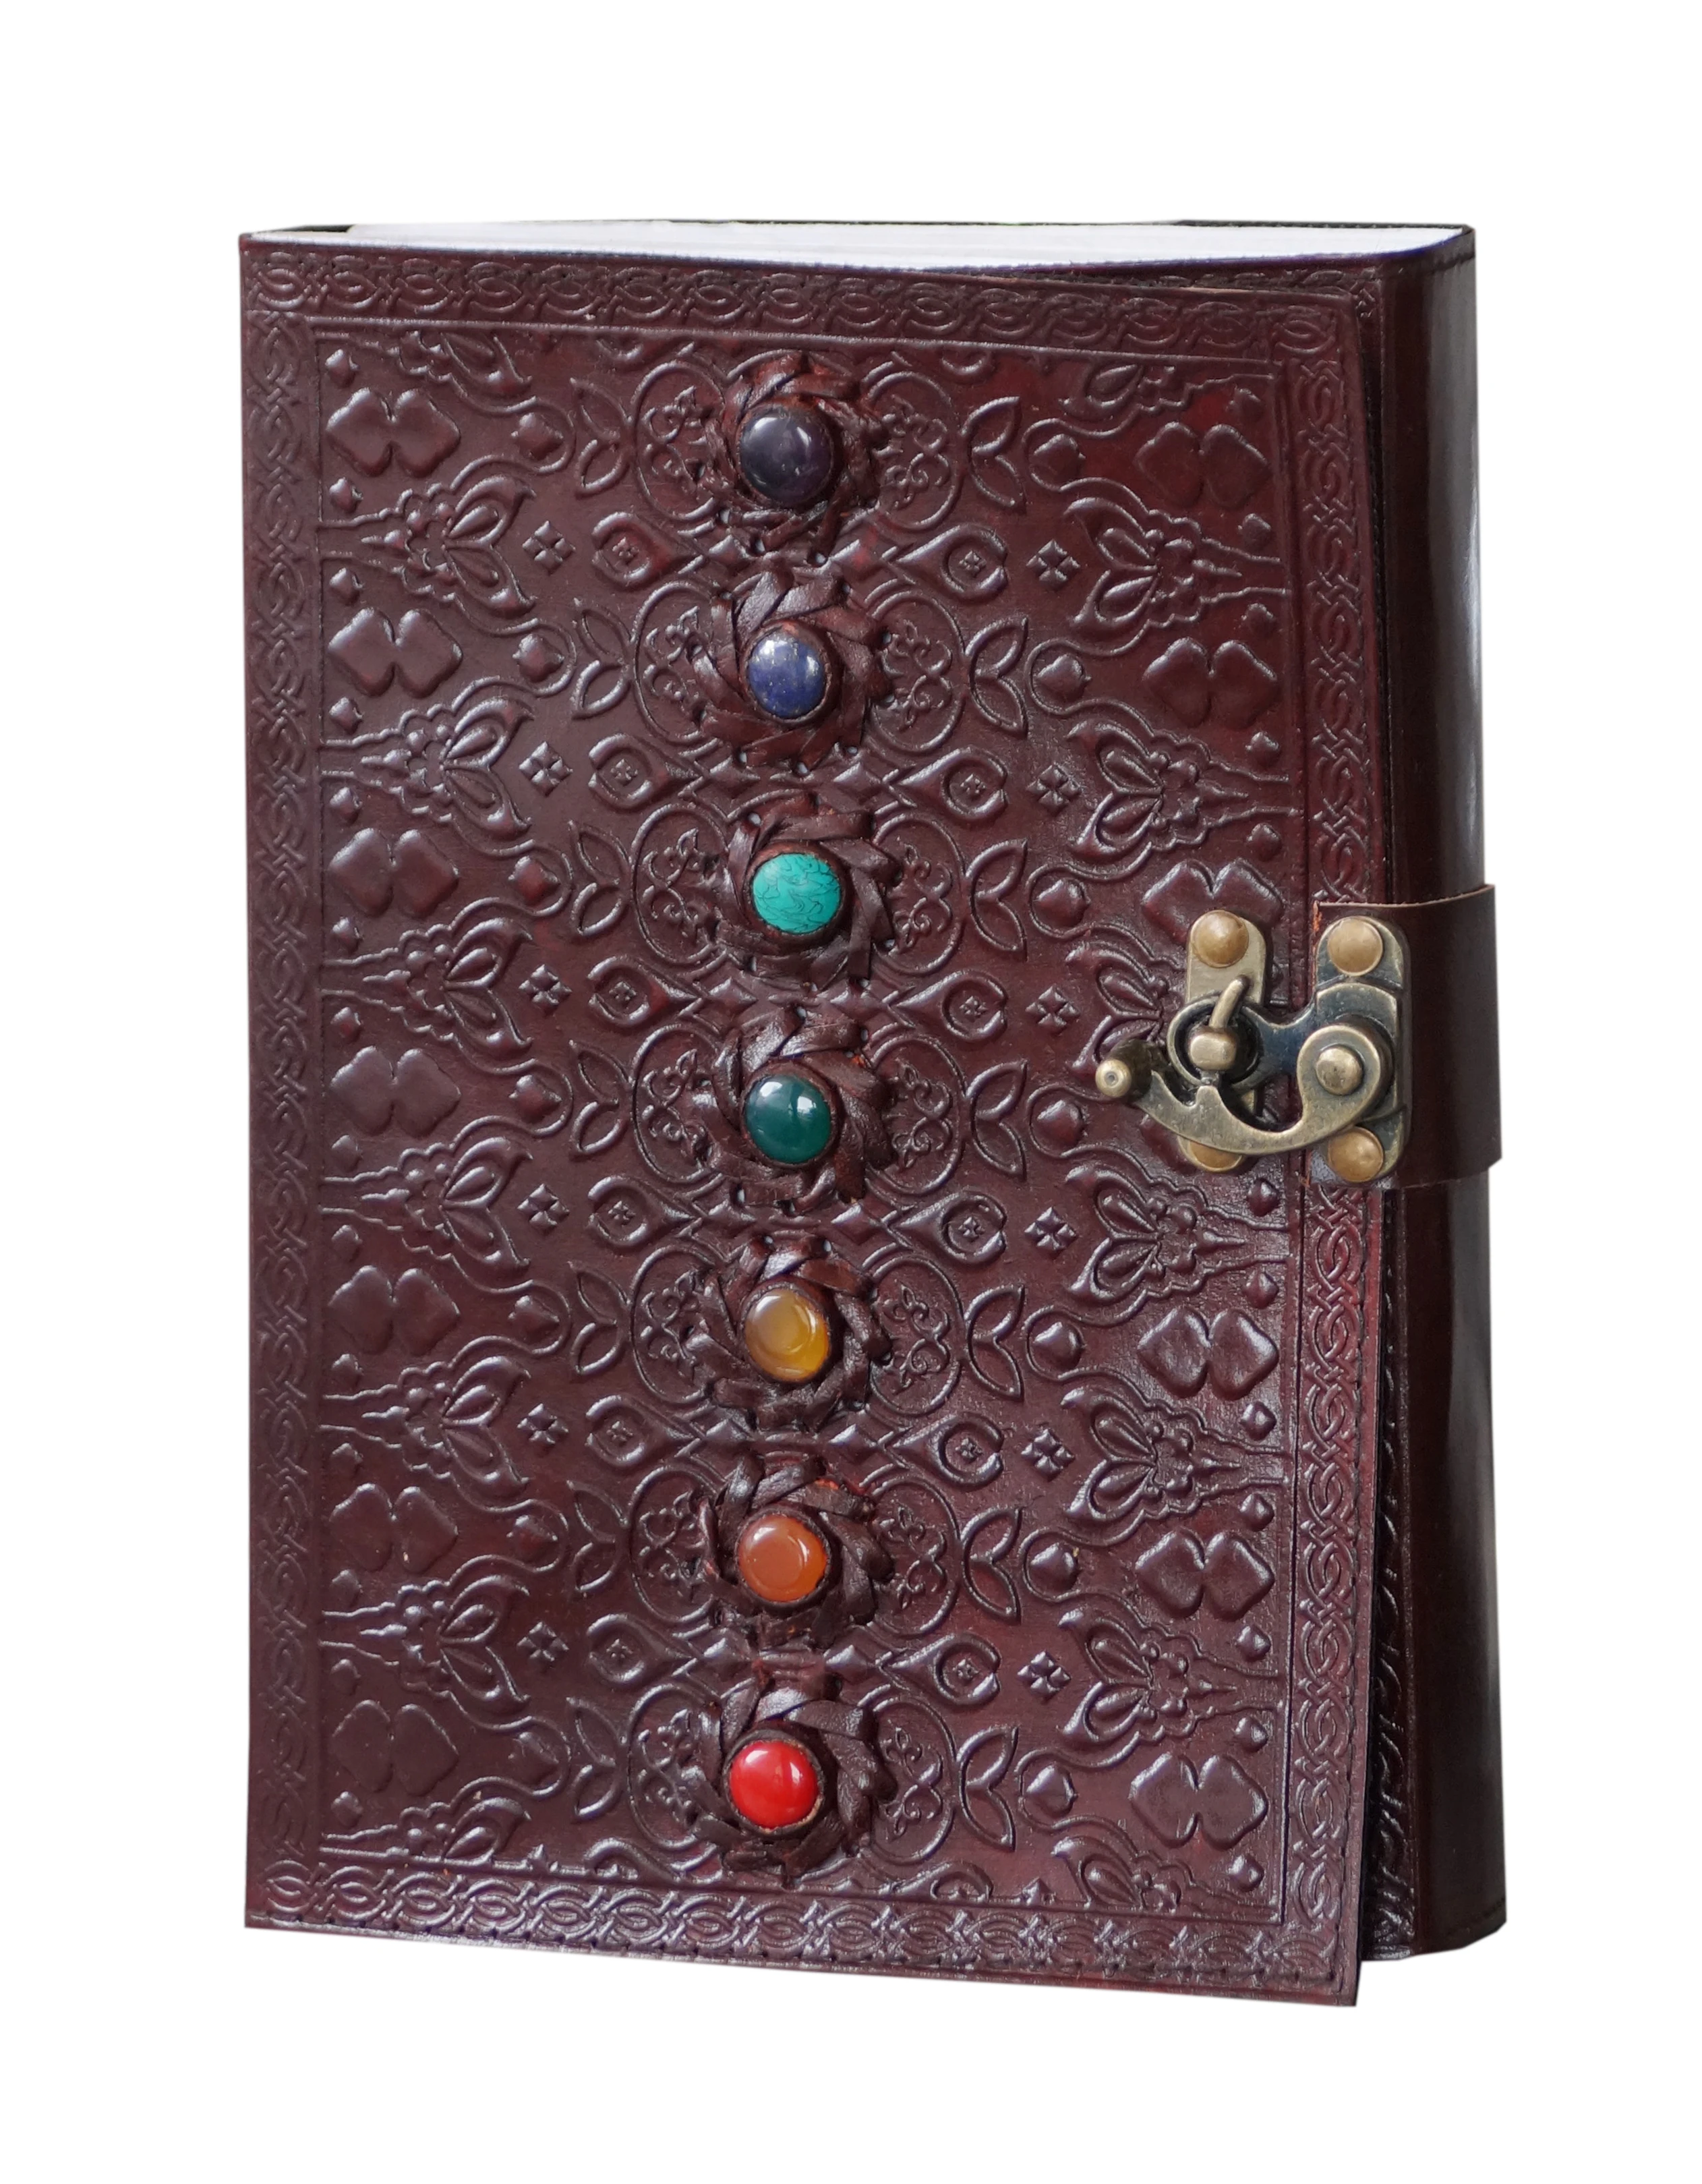 Leather Journal Large Spiritual Chakra Healing Seven Stone Witchcraft Supplies Grimoire Book of Shadows Diary Writing Notebook